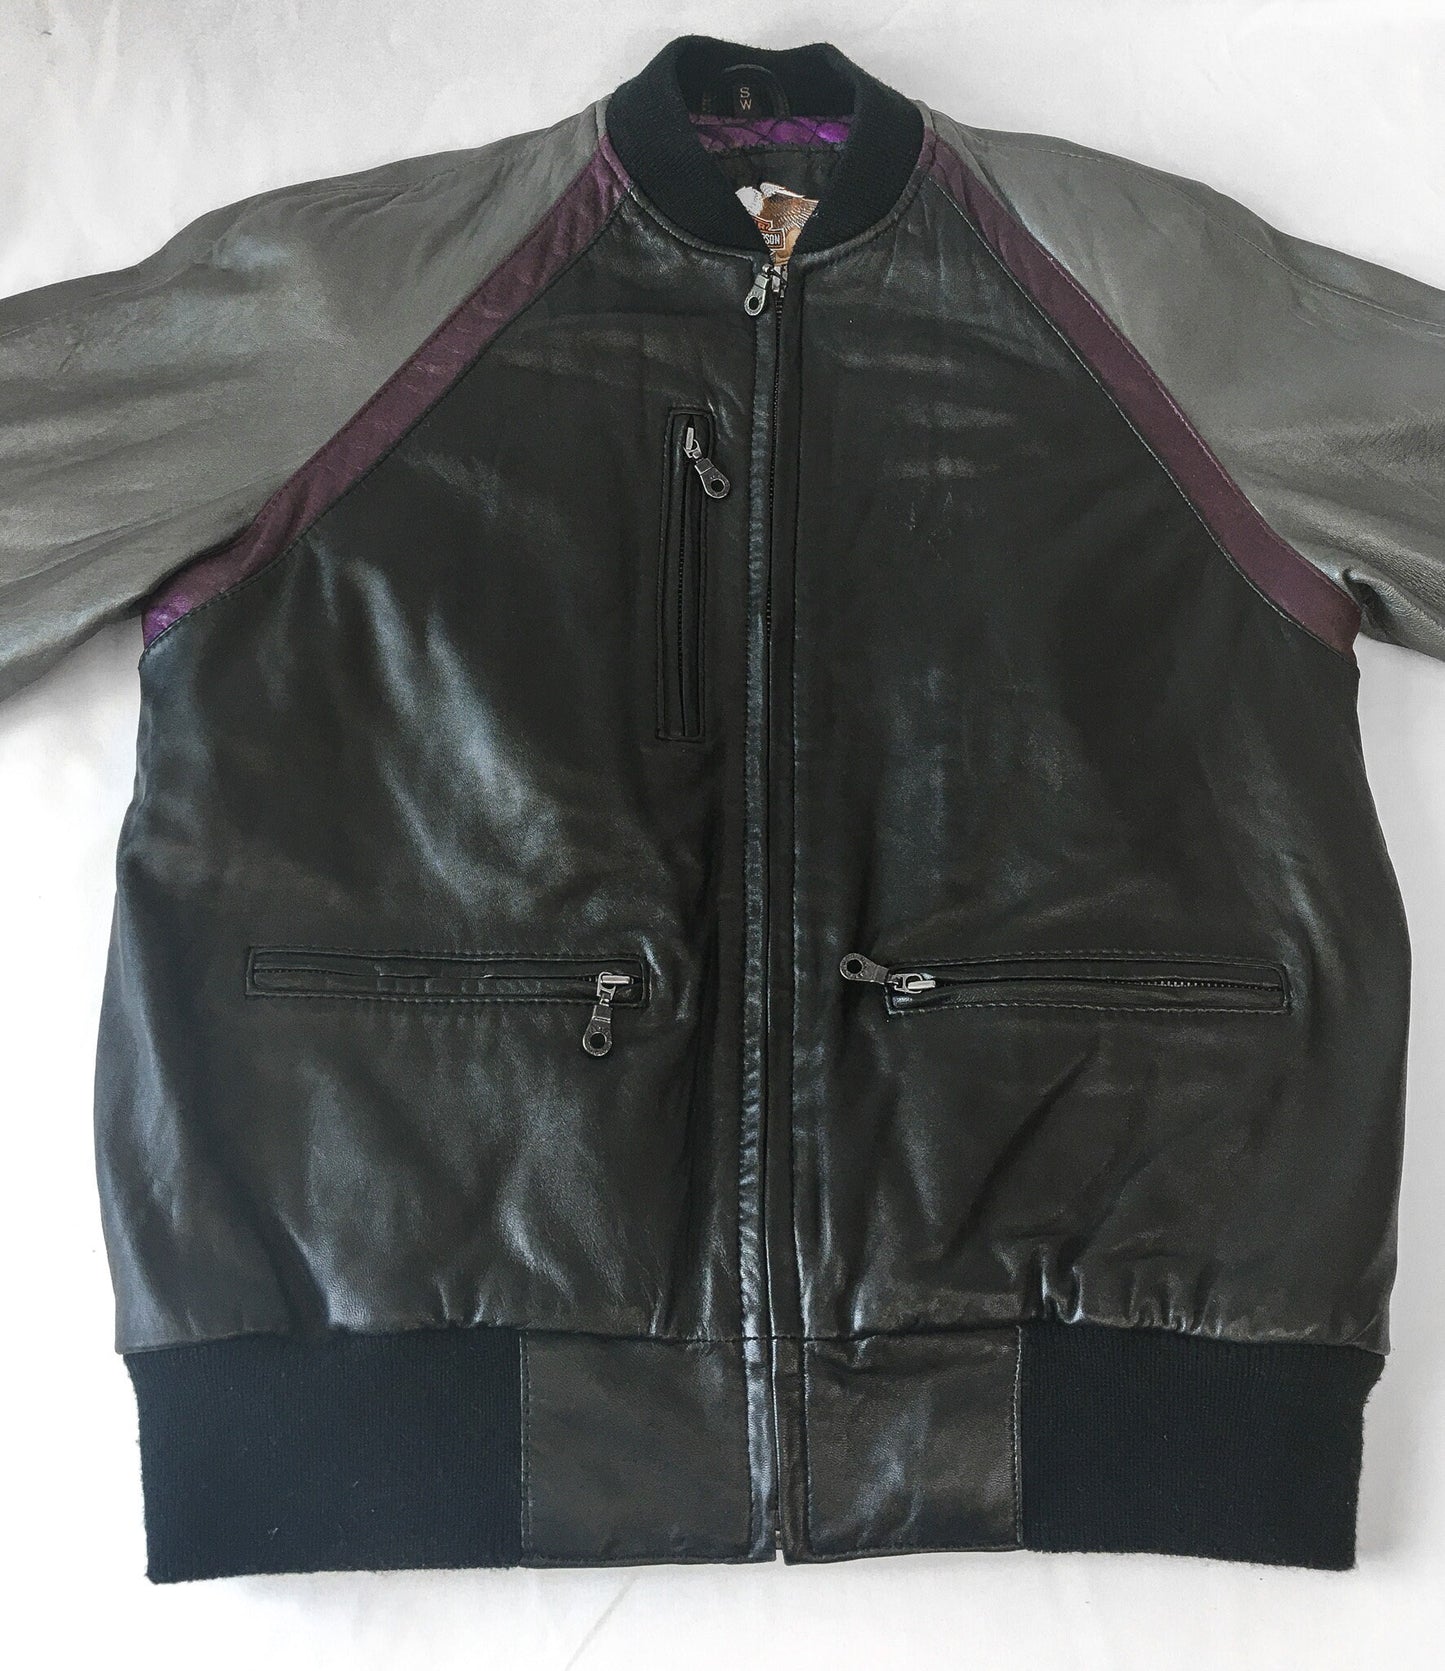 Vintage Harley Davidson Gray and Purple Leather Bomber Jacket with Studded and Embroidered Details, Sz. S/M